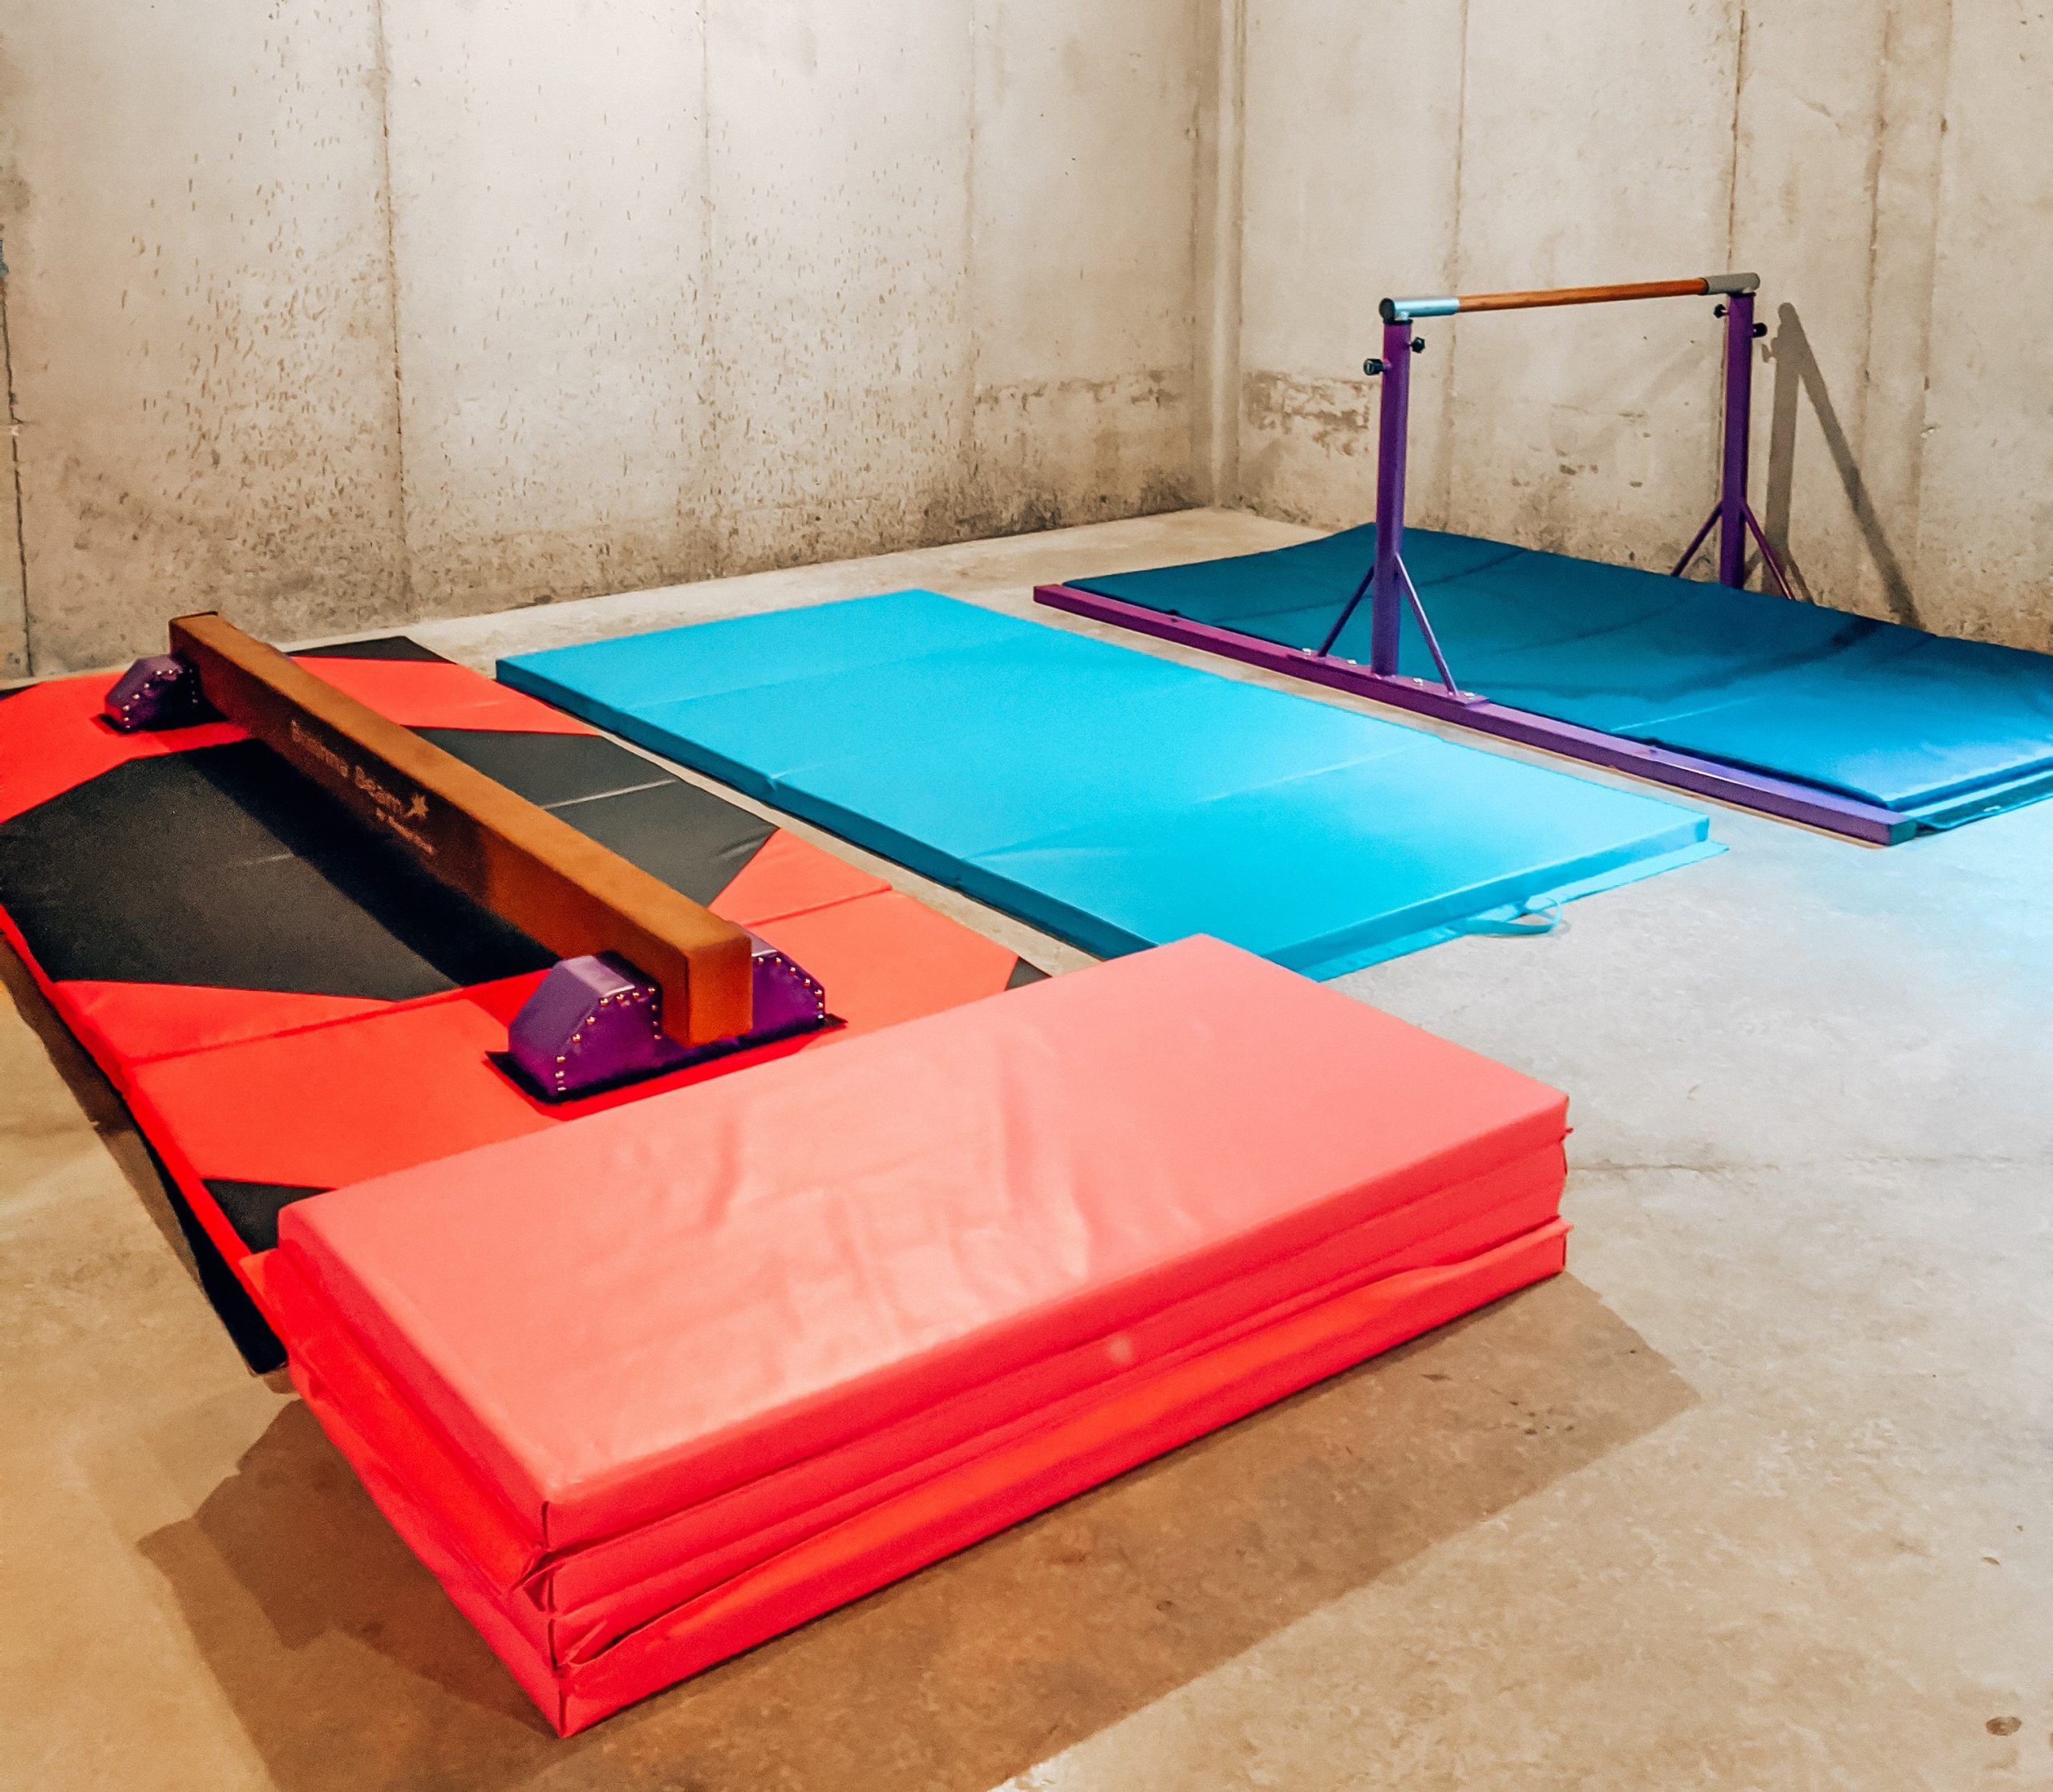 Best Gymnastics Bars For Home: What To Look For 